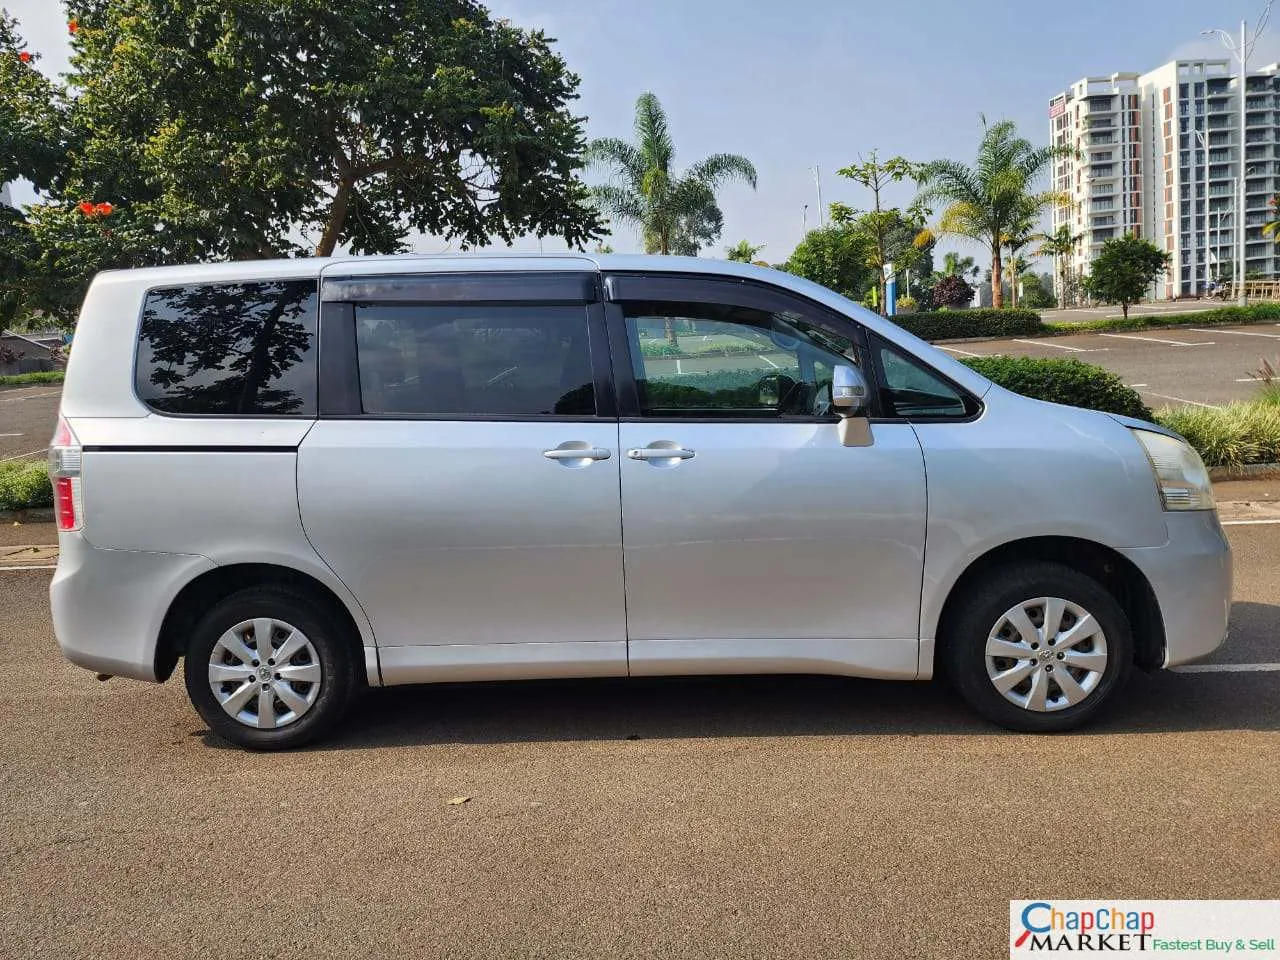 Cars For Sale/Vehicles Cars-Toyota NOAH New Shape 🔥 You Pay 30% Deposit Trade in OK EXCLUSIVE 10